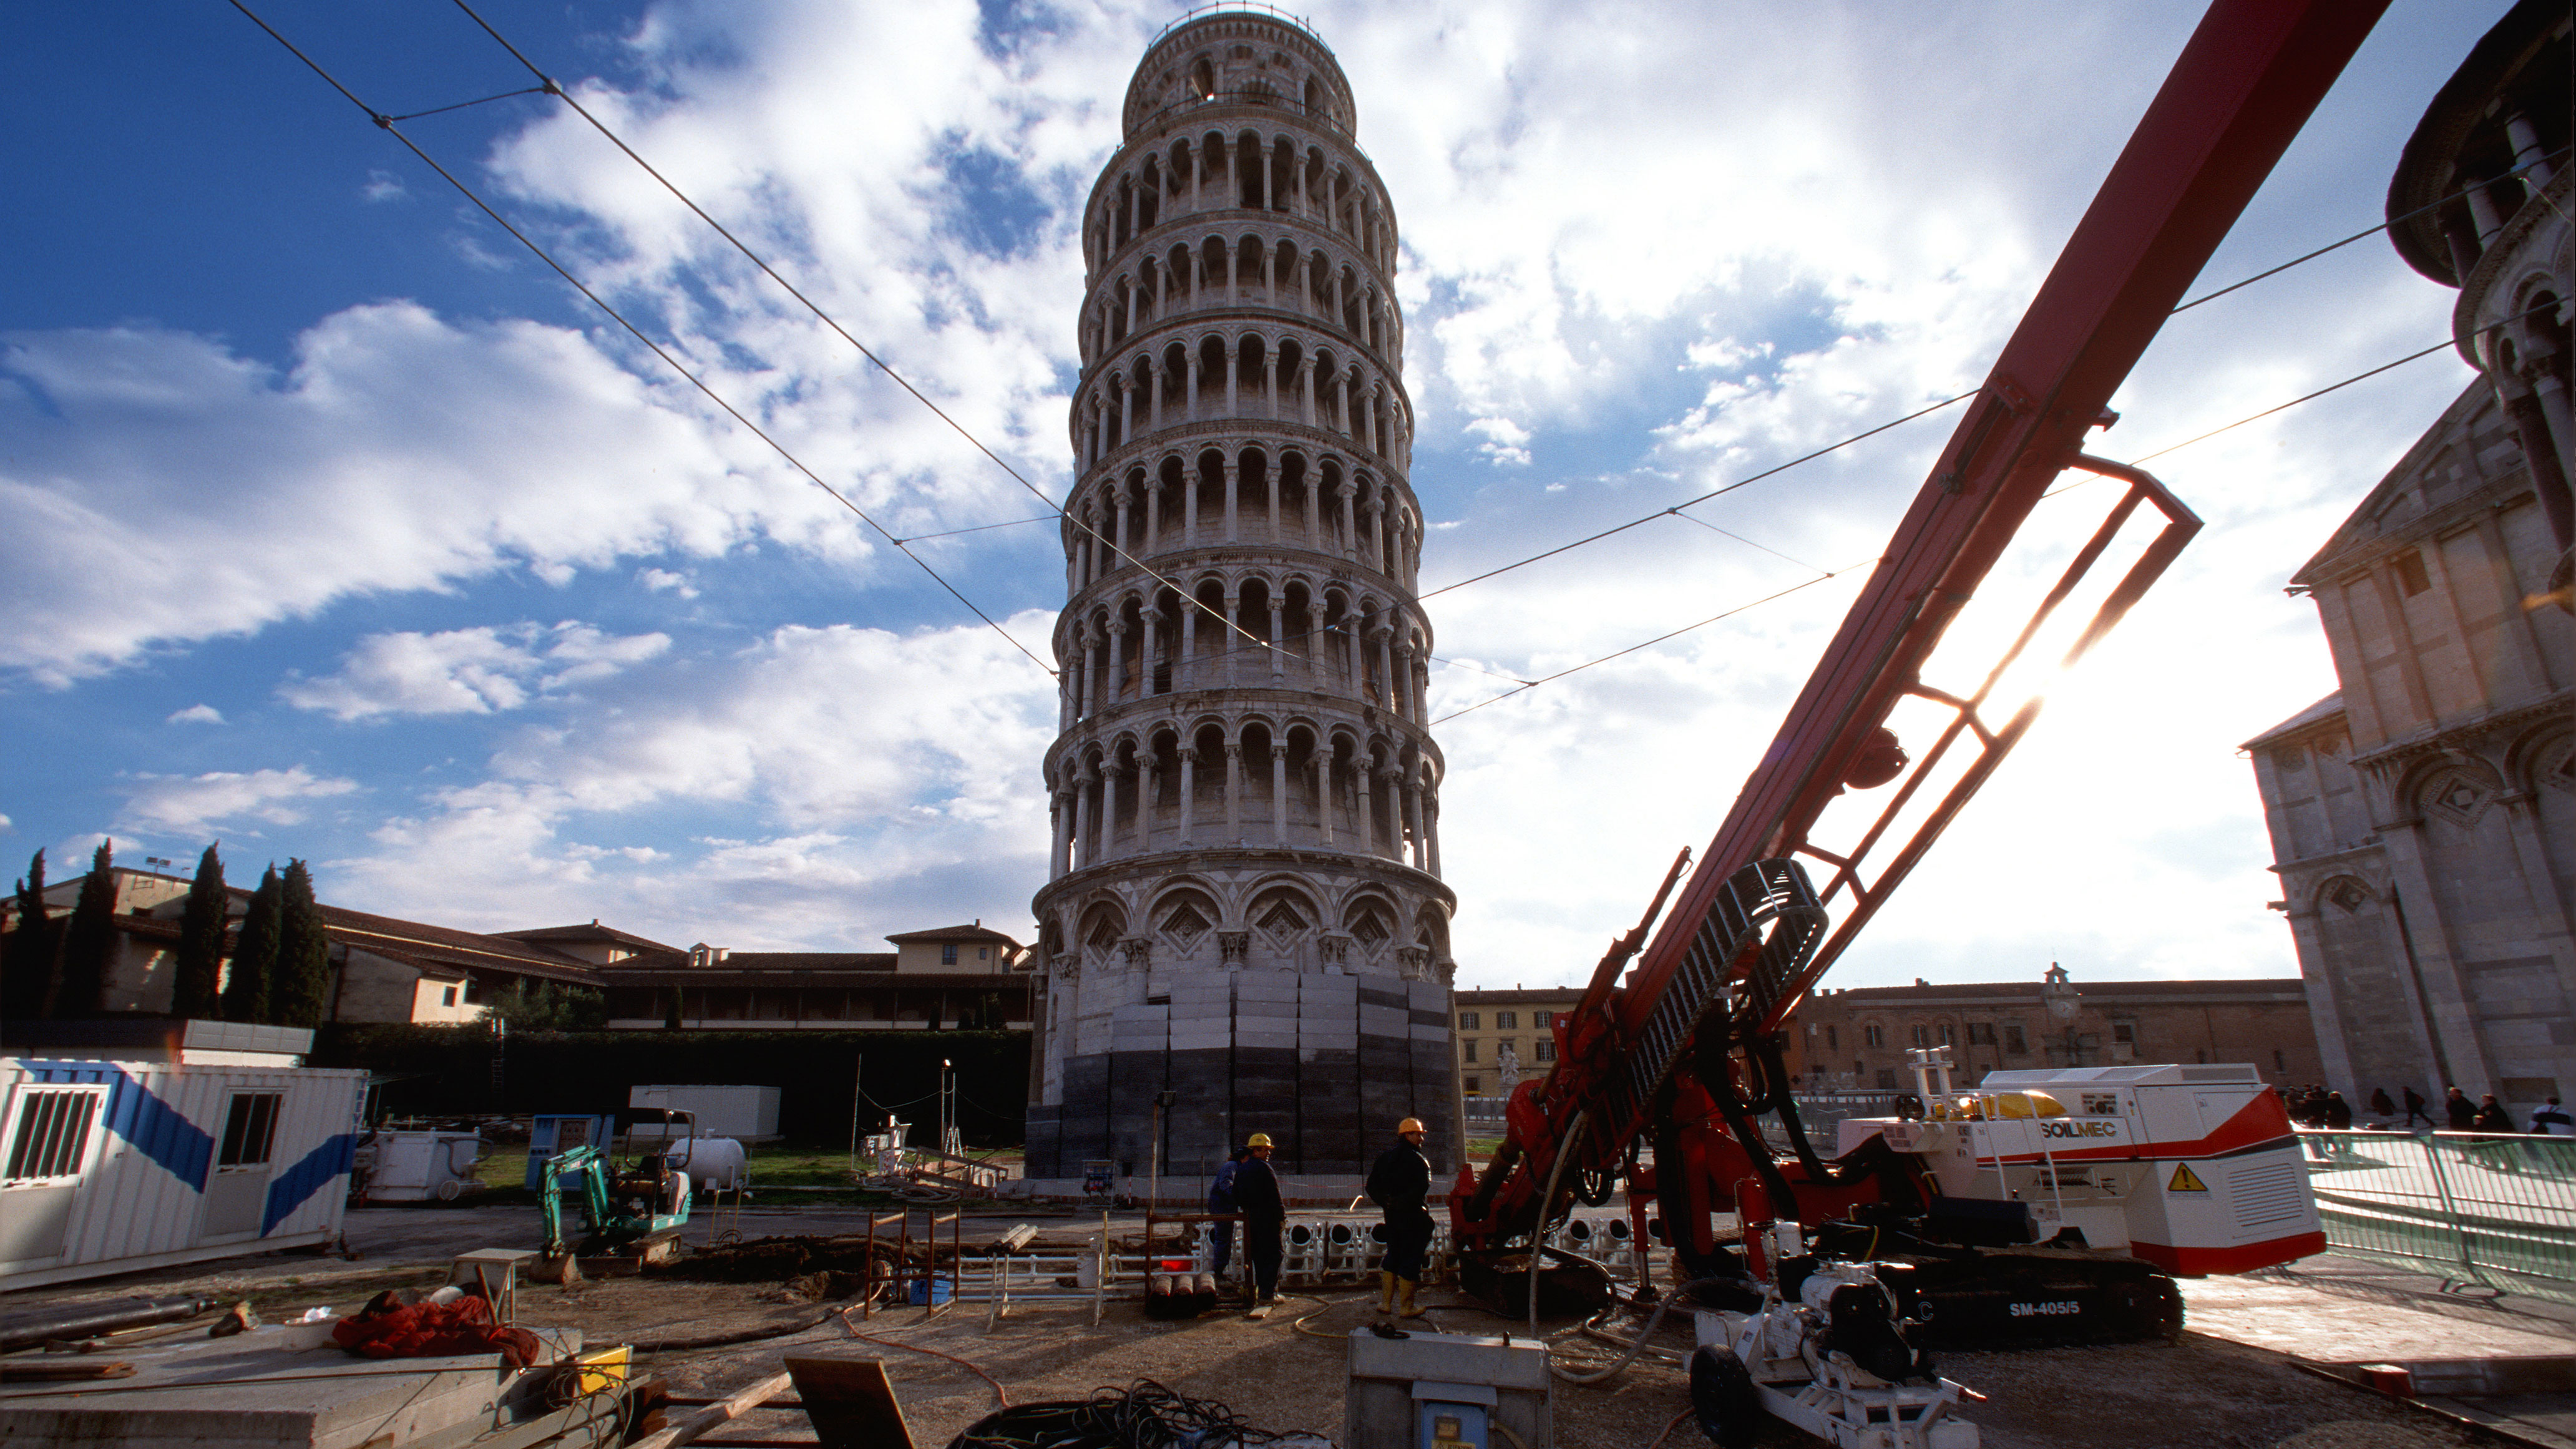 The restoration of the LEANING TOWER OF PISA | Trevi 1